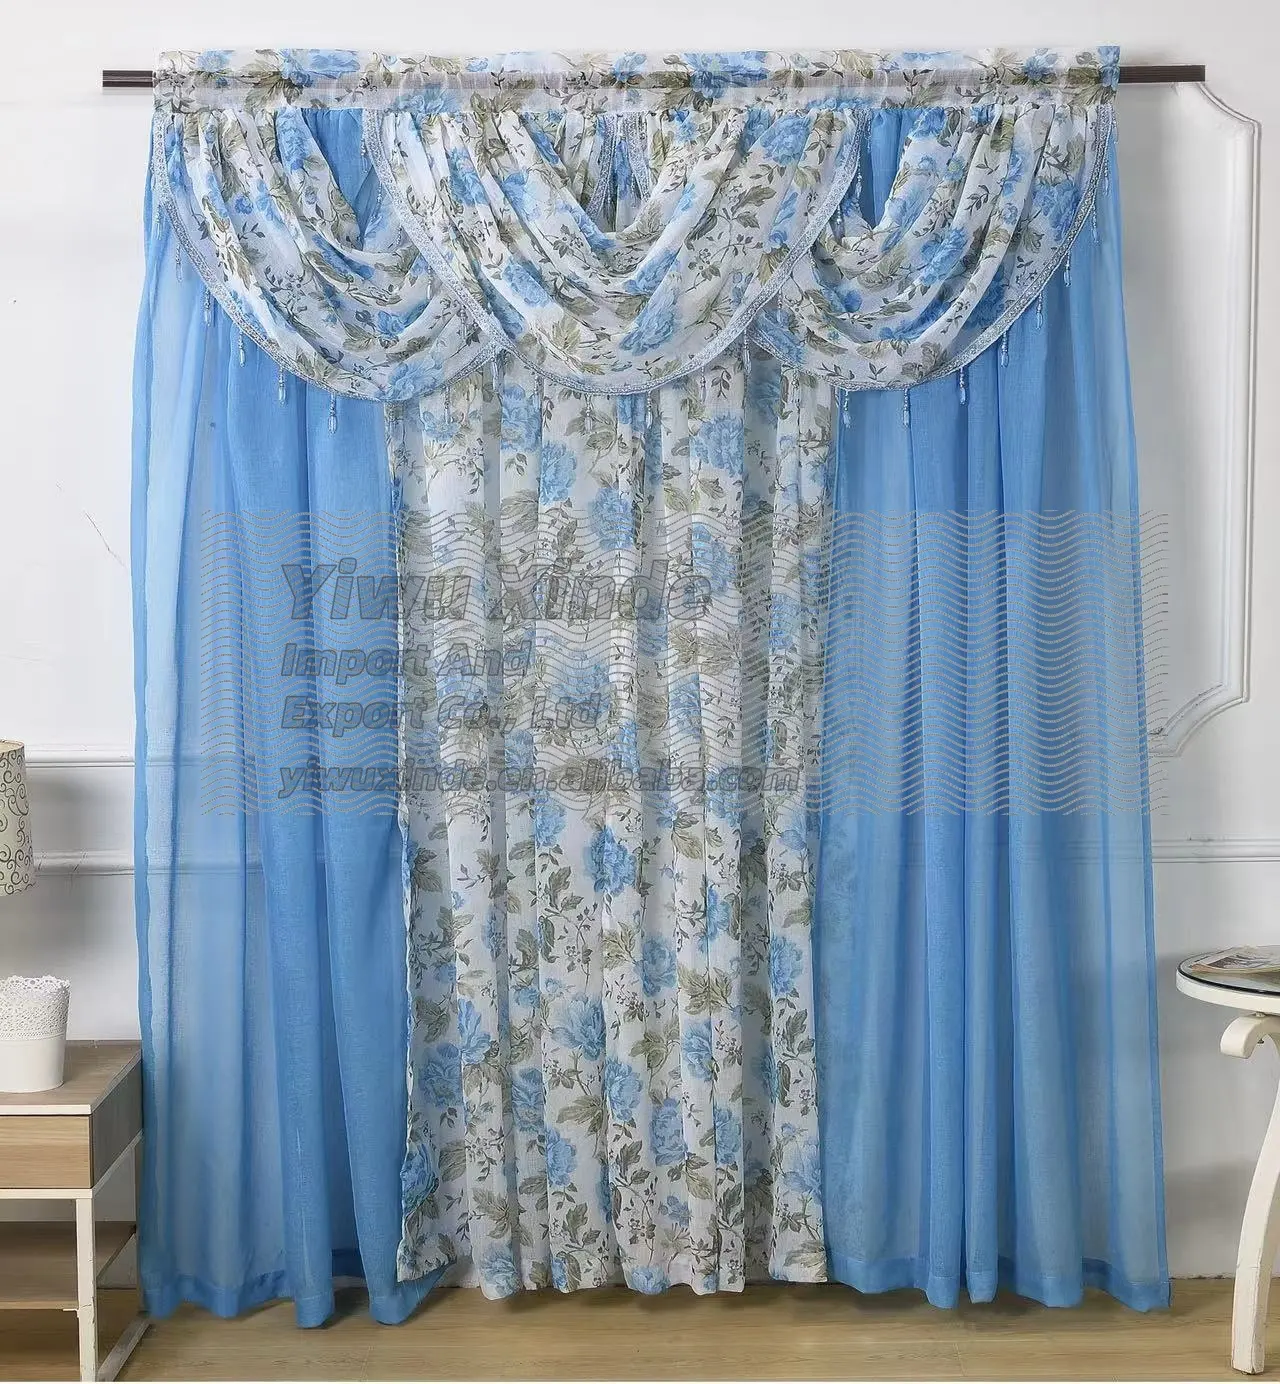 hot sale 5pieces colorful curtains for the living room ready to ship curtains for the house king size luxury window curtain